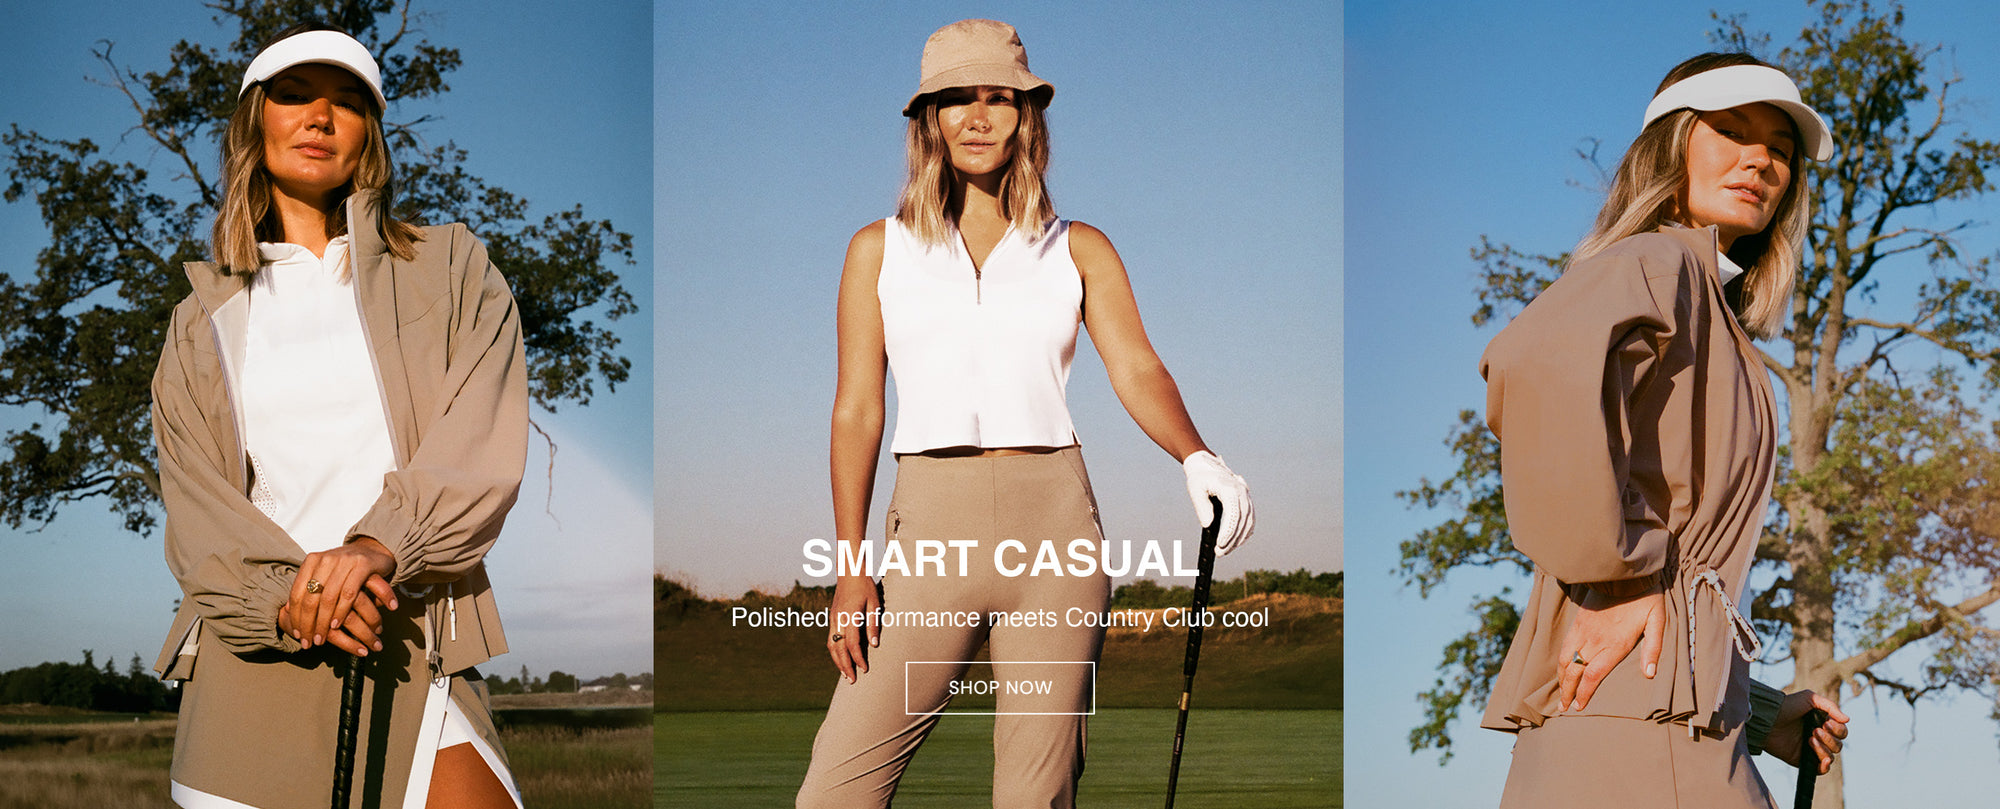 Woman at golf course wearing smart casual luxury golf wear